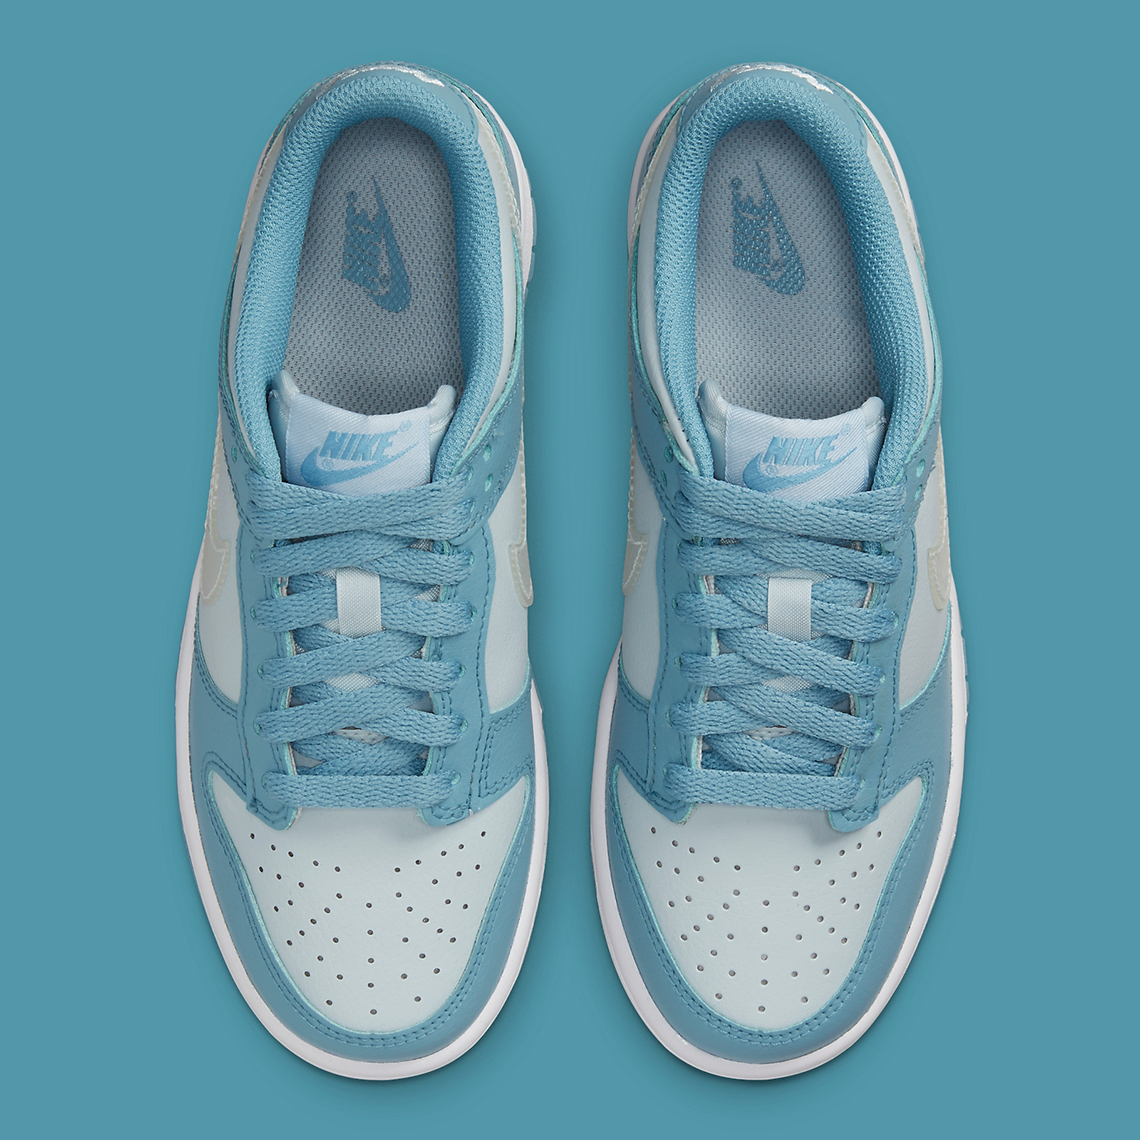 nike sail dunk low blue clear swoosh release date 8